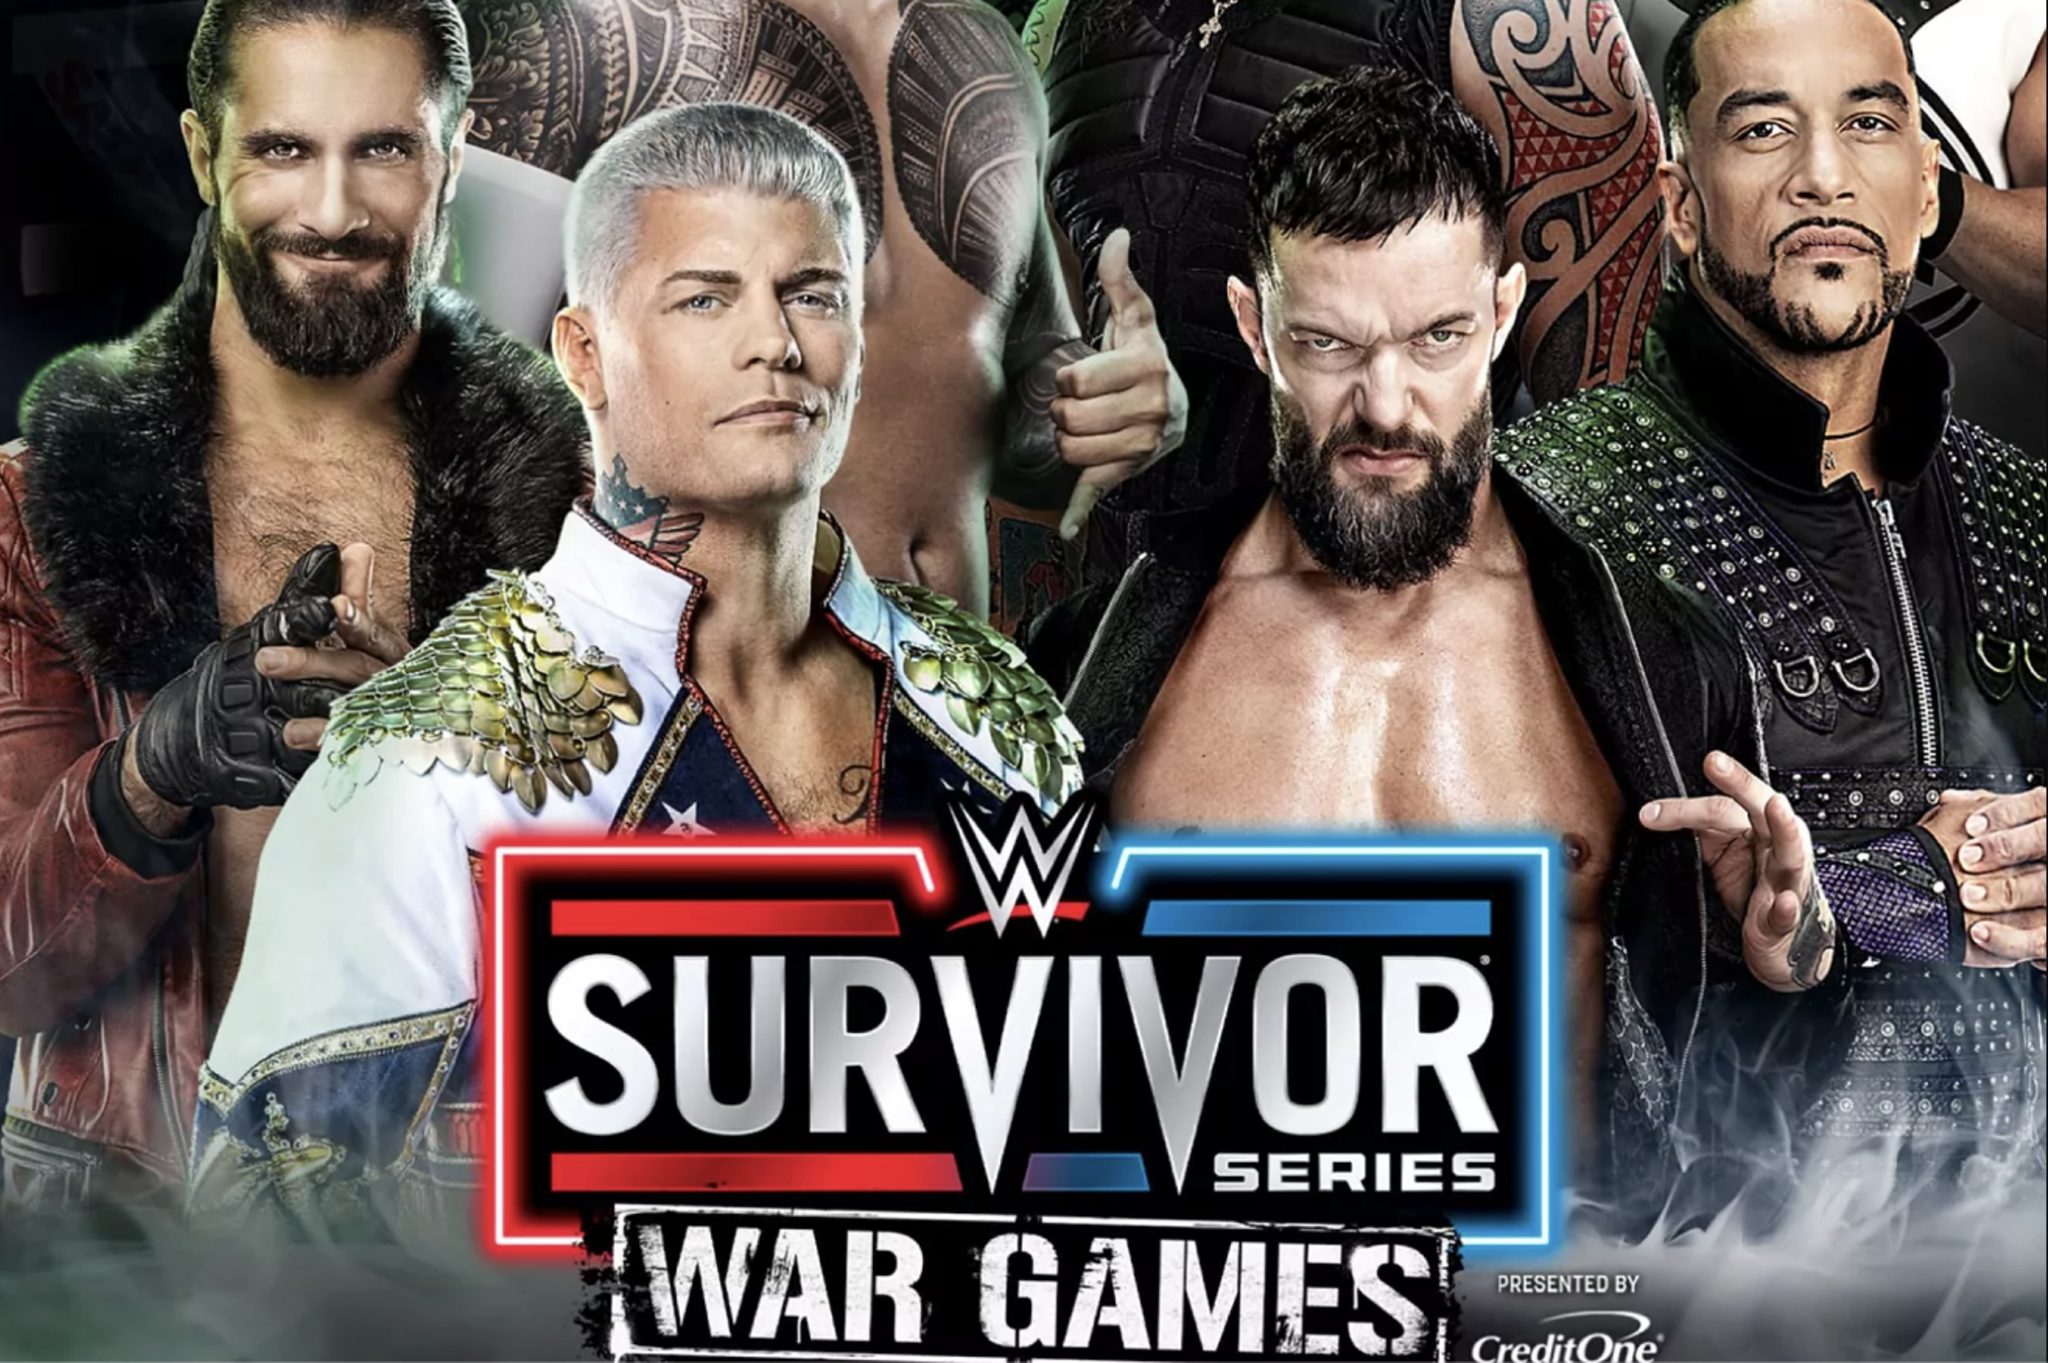 WWE Survivor Series Predictions: What can we expect from a big night of wrestling?